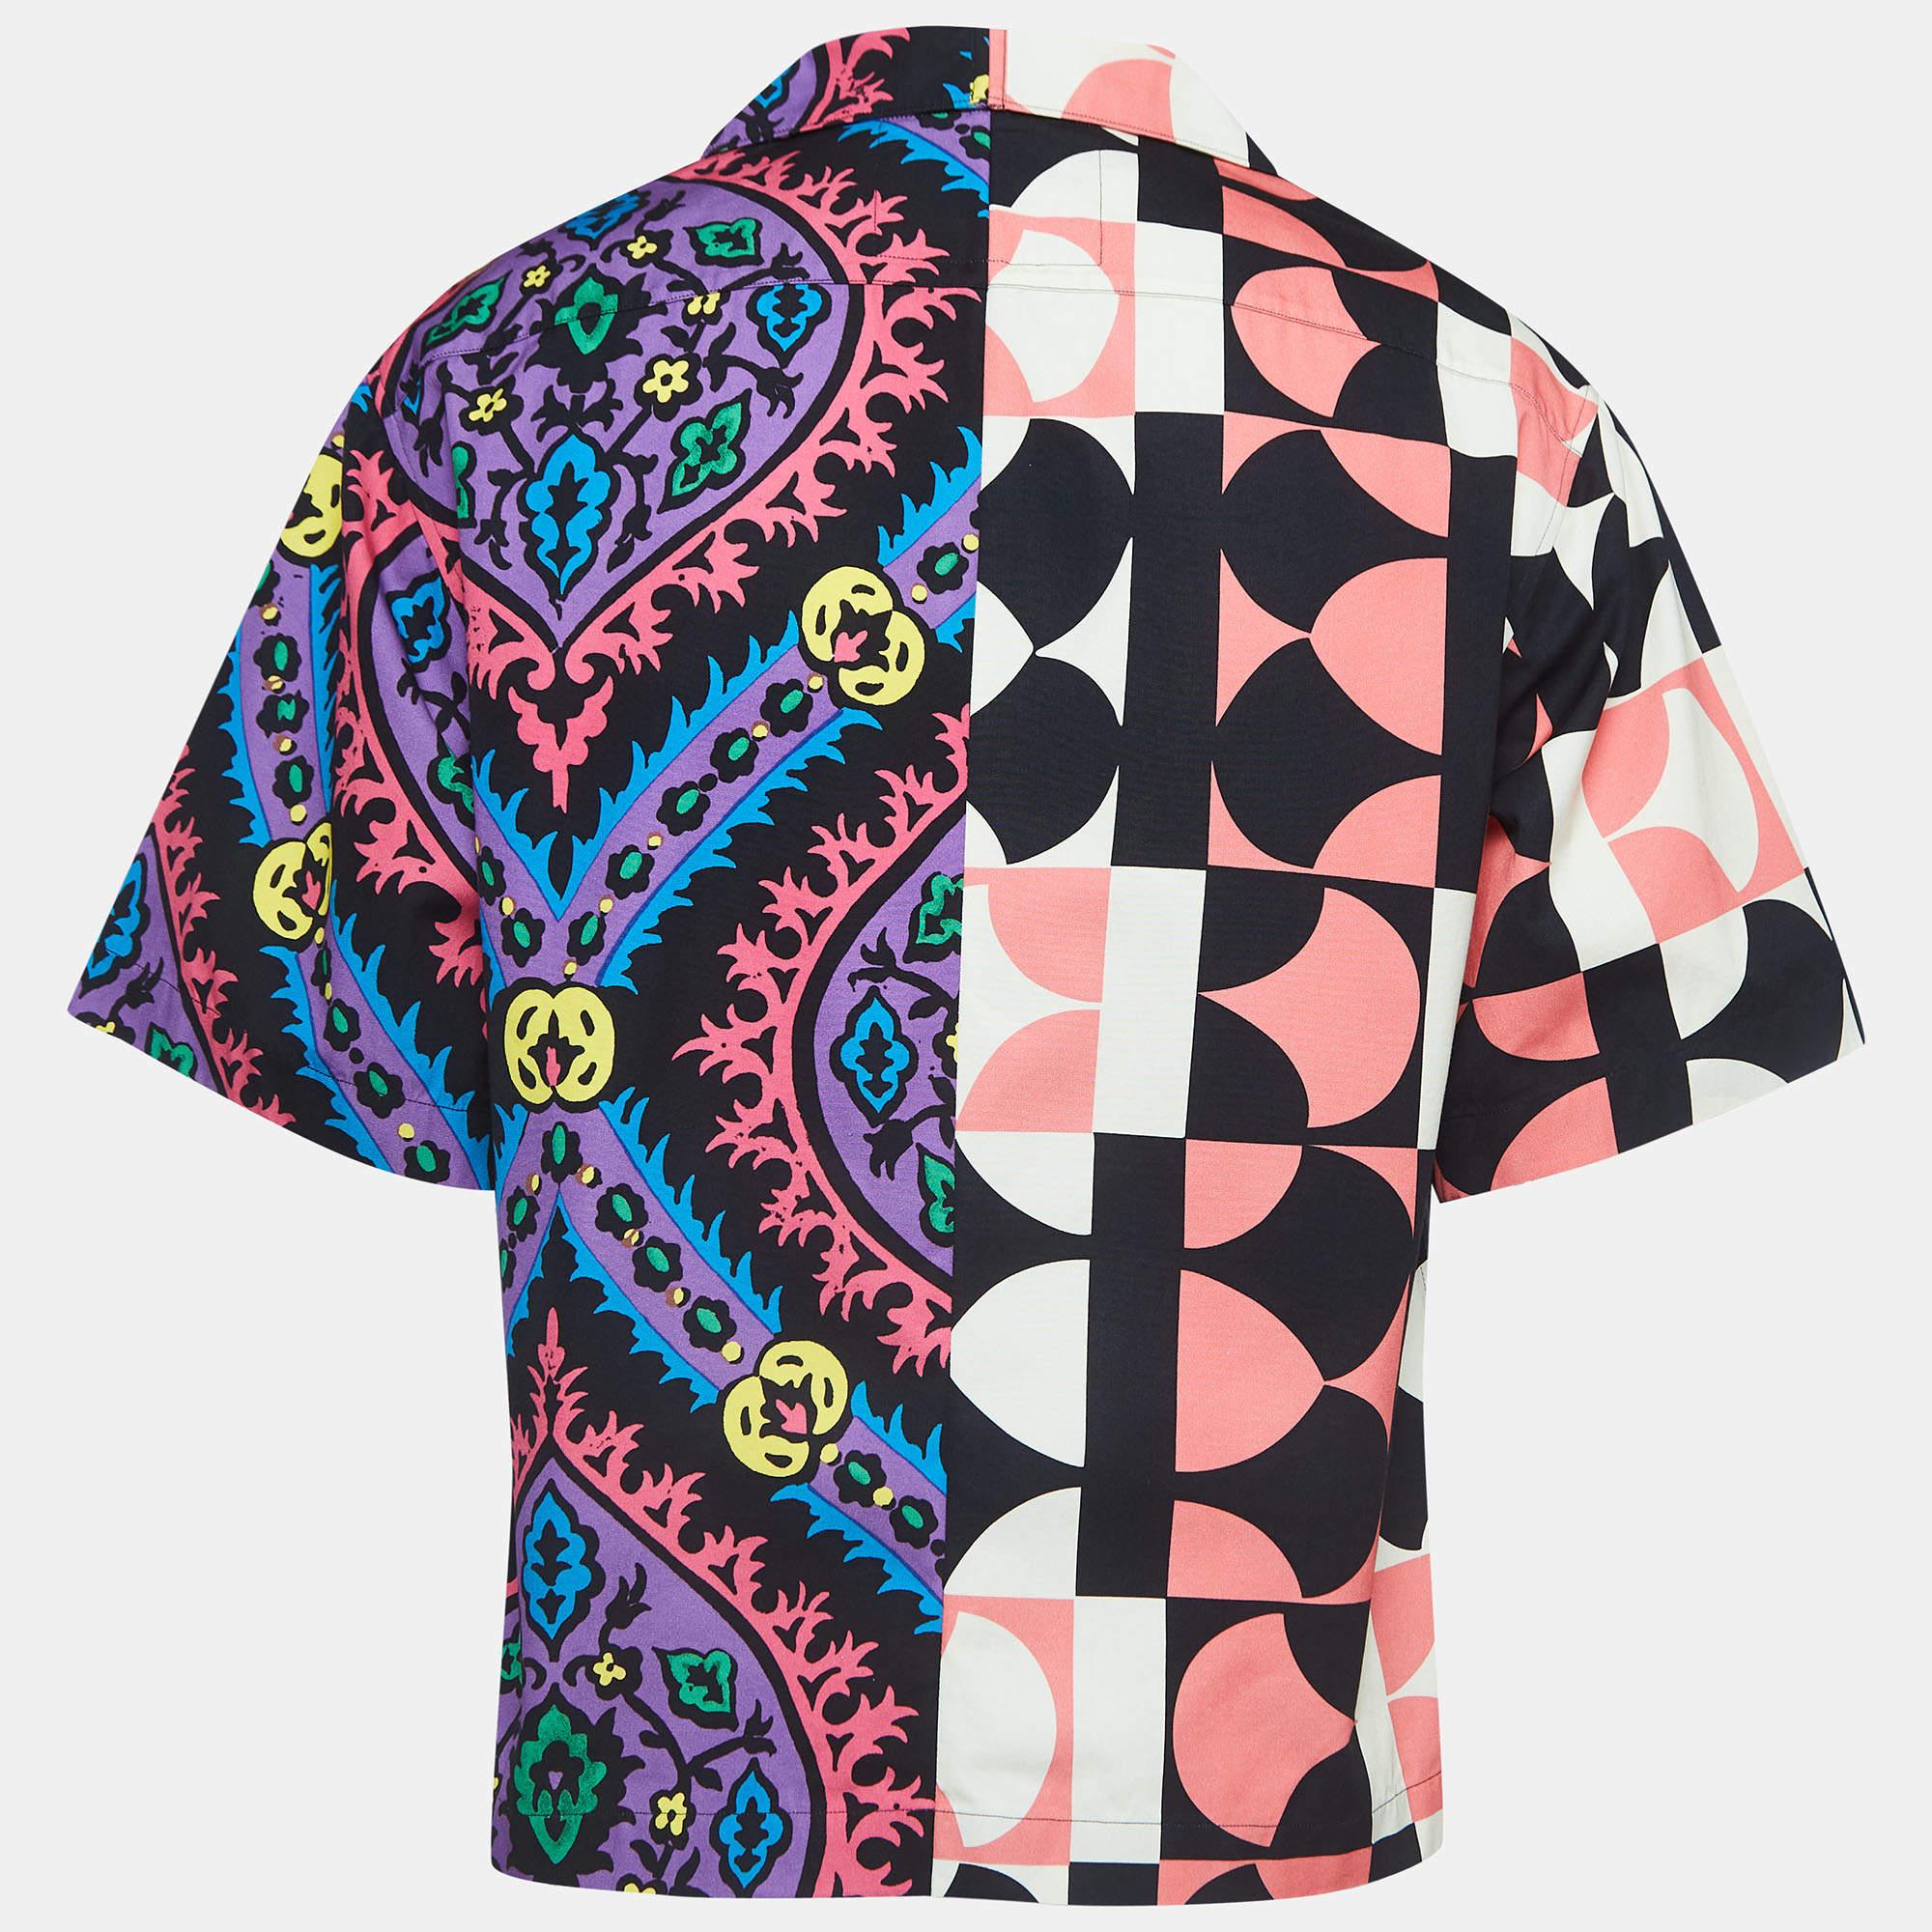 Embrace vibrant sophistication with the Prada shirt. Crafted with premium cotton, it boasts a striking array of colors in an intricate print, marrying contemporary style with luxurious comfort for a statement piece that exudes refined elegance.

